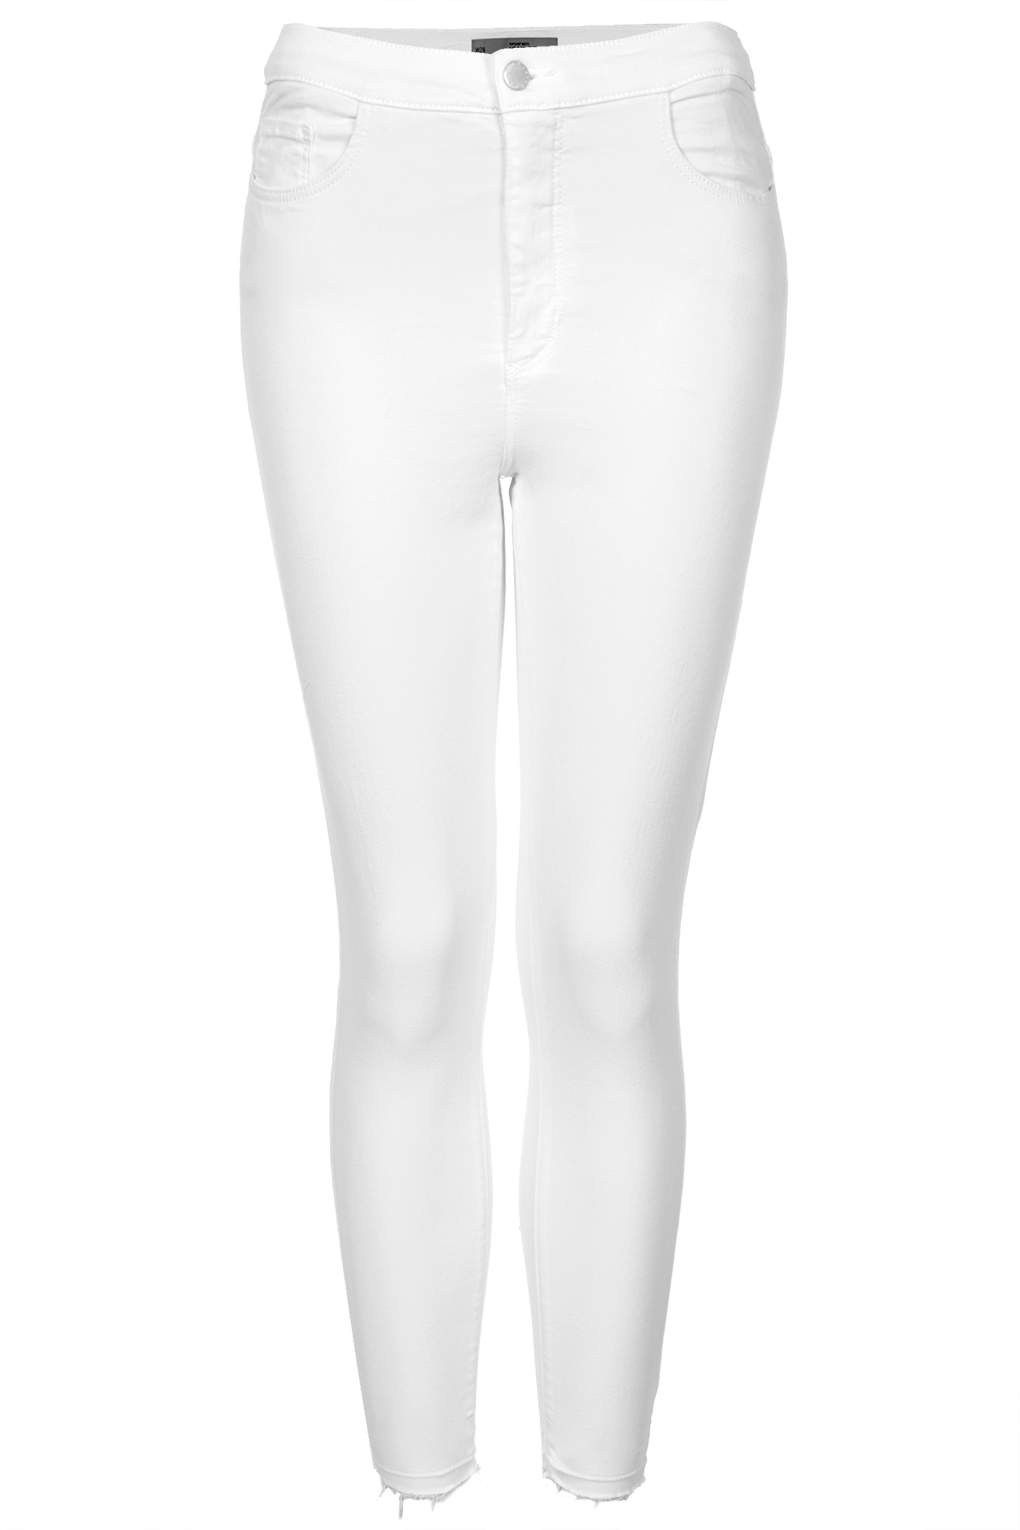 Lyst - Topshop White Crop Joni Jeans in White